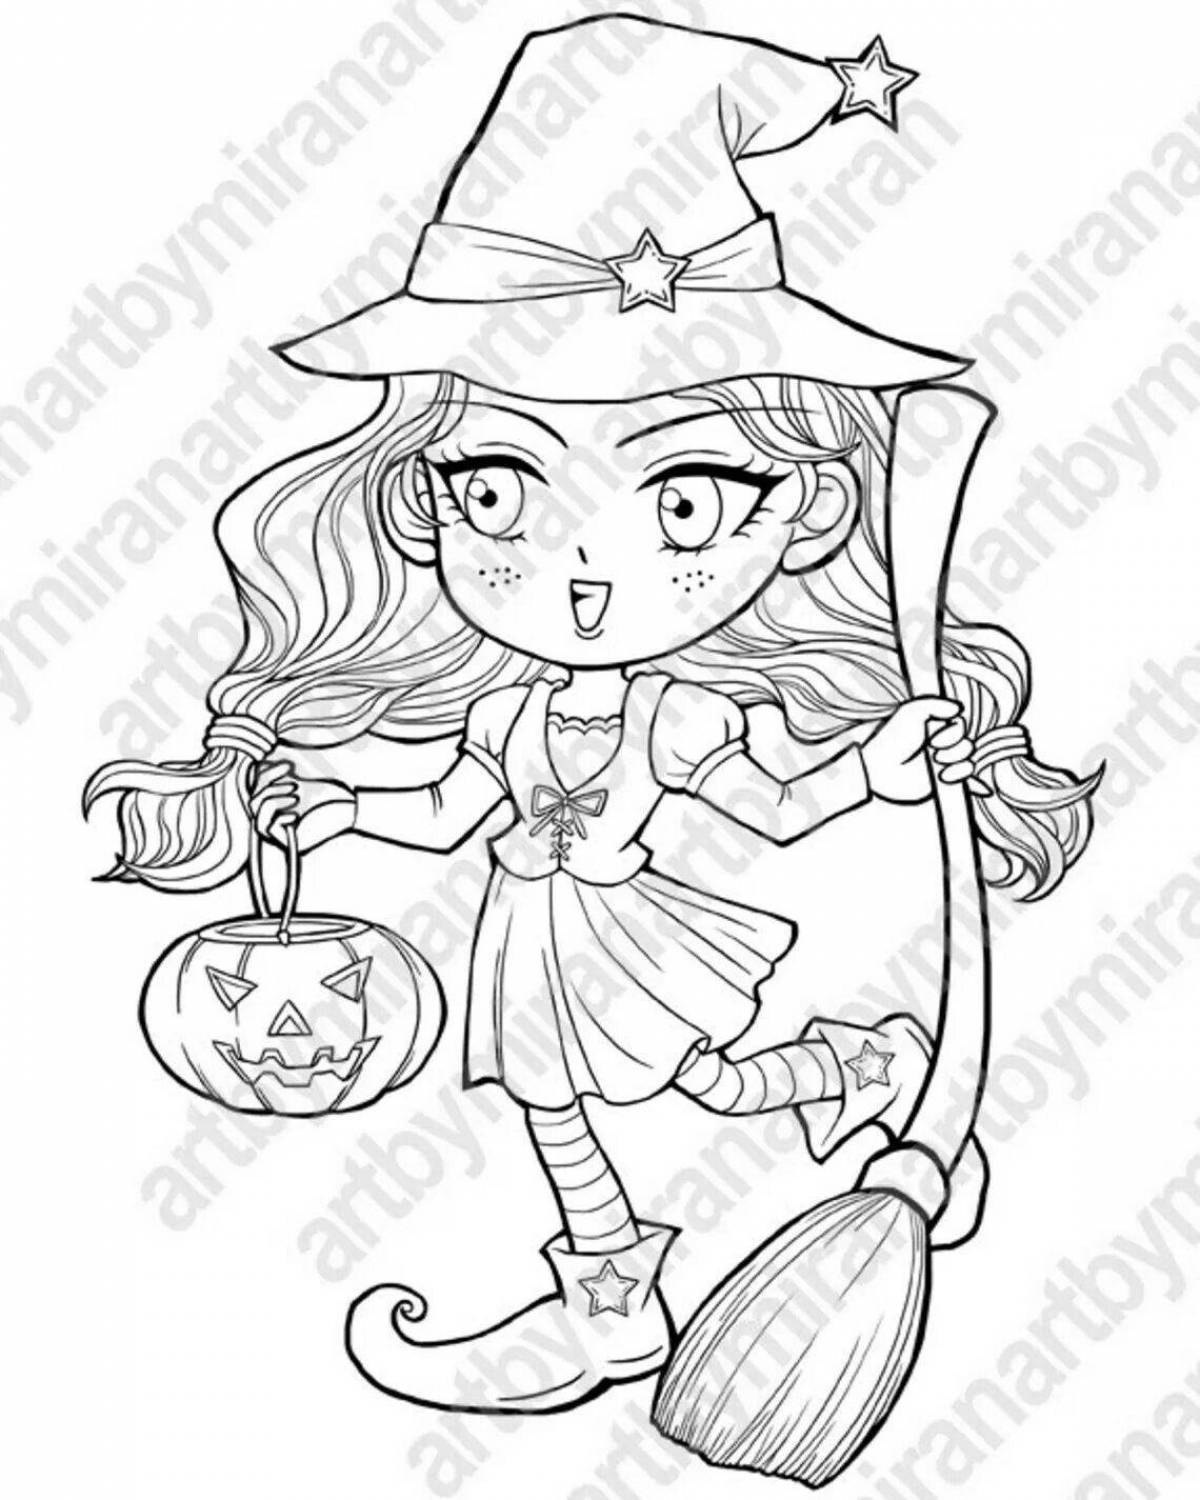 Aya and the witch incredible coloring book